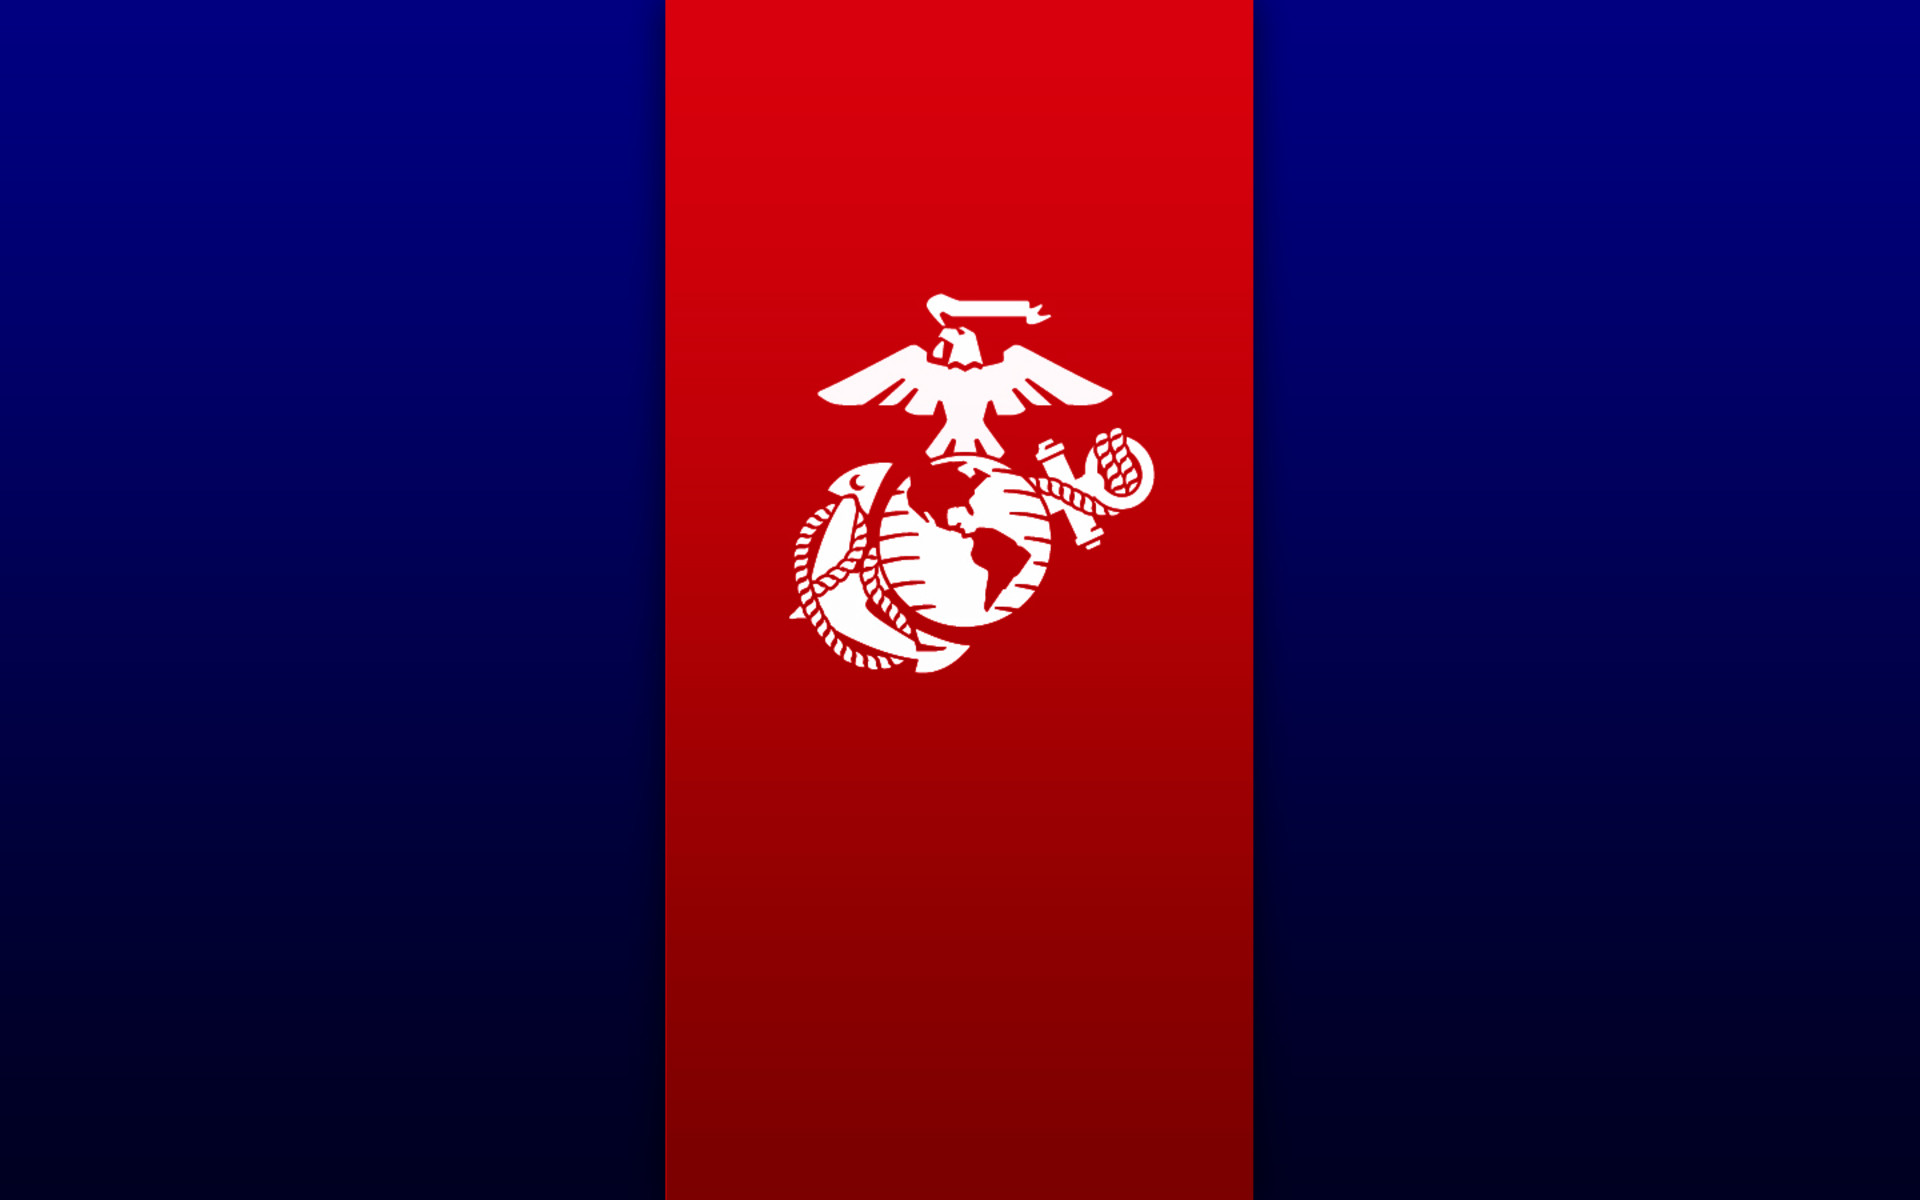 1920×1440 Px HD Desktop Wallpaper : Wallpapers Usmc Red And Blue Background